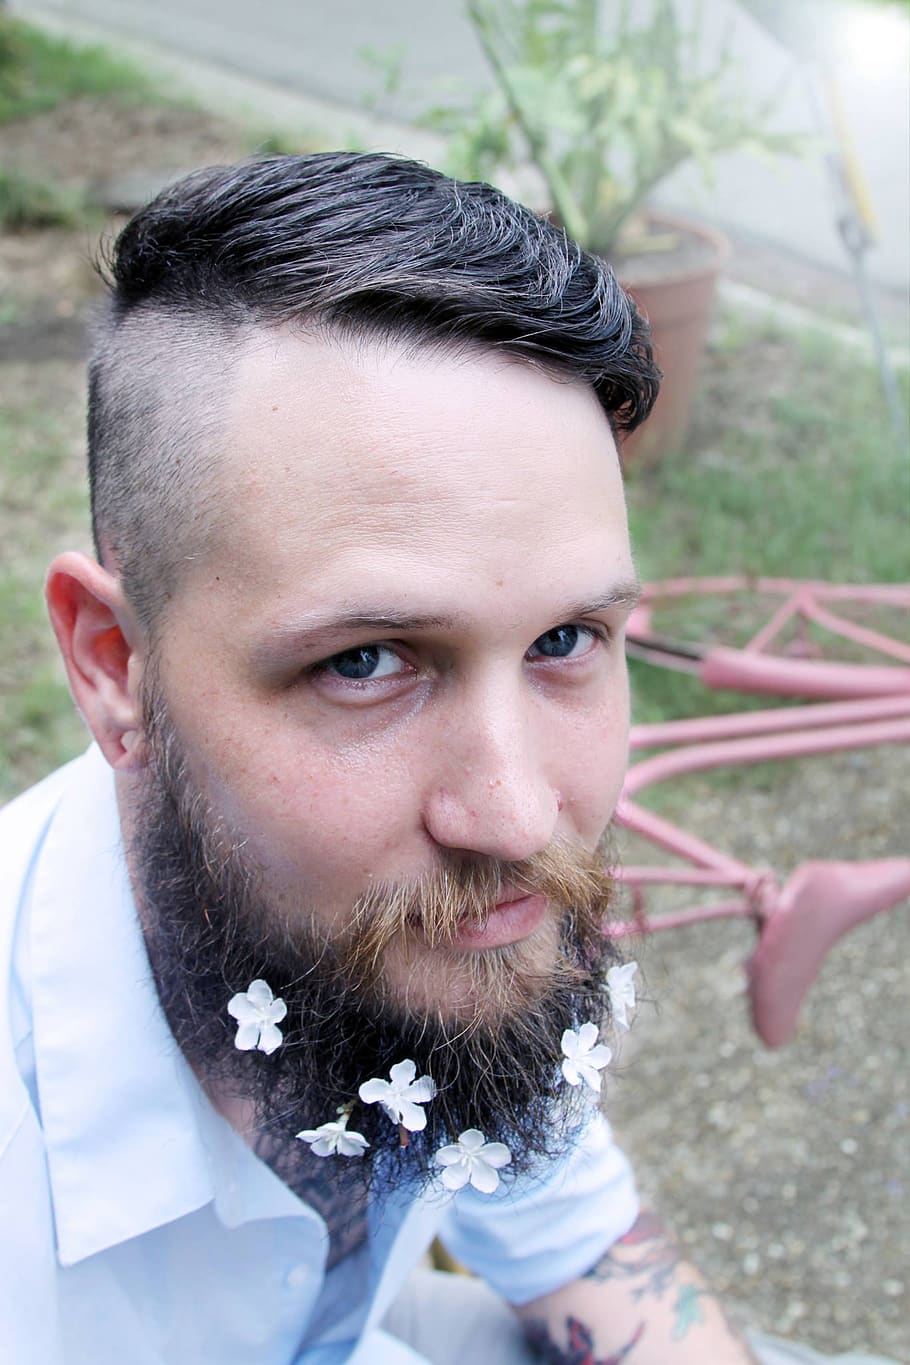 hipster, man, beard, style, flowers, guy, male, outdoors, day, person